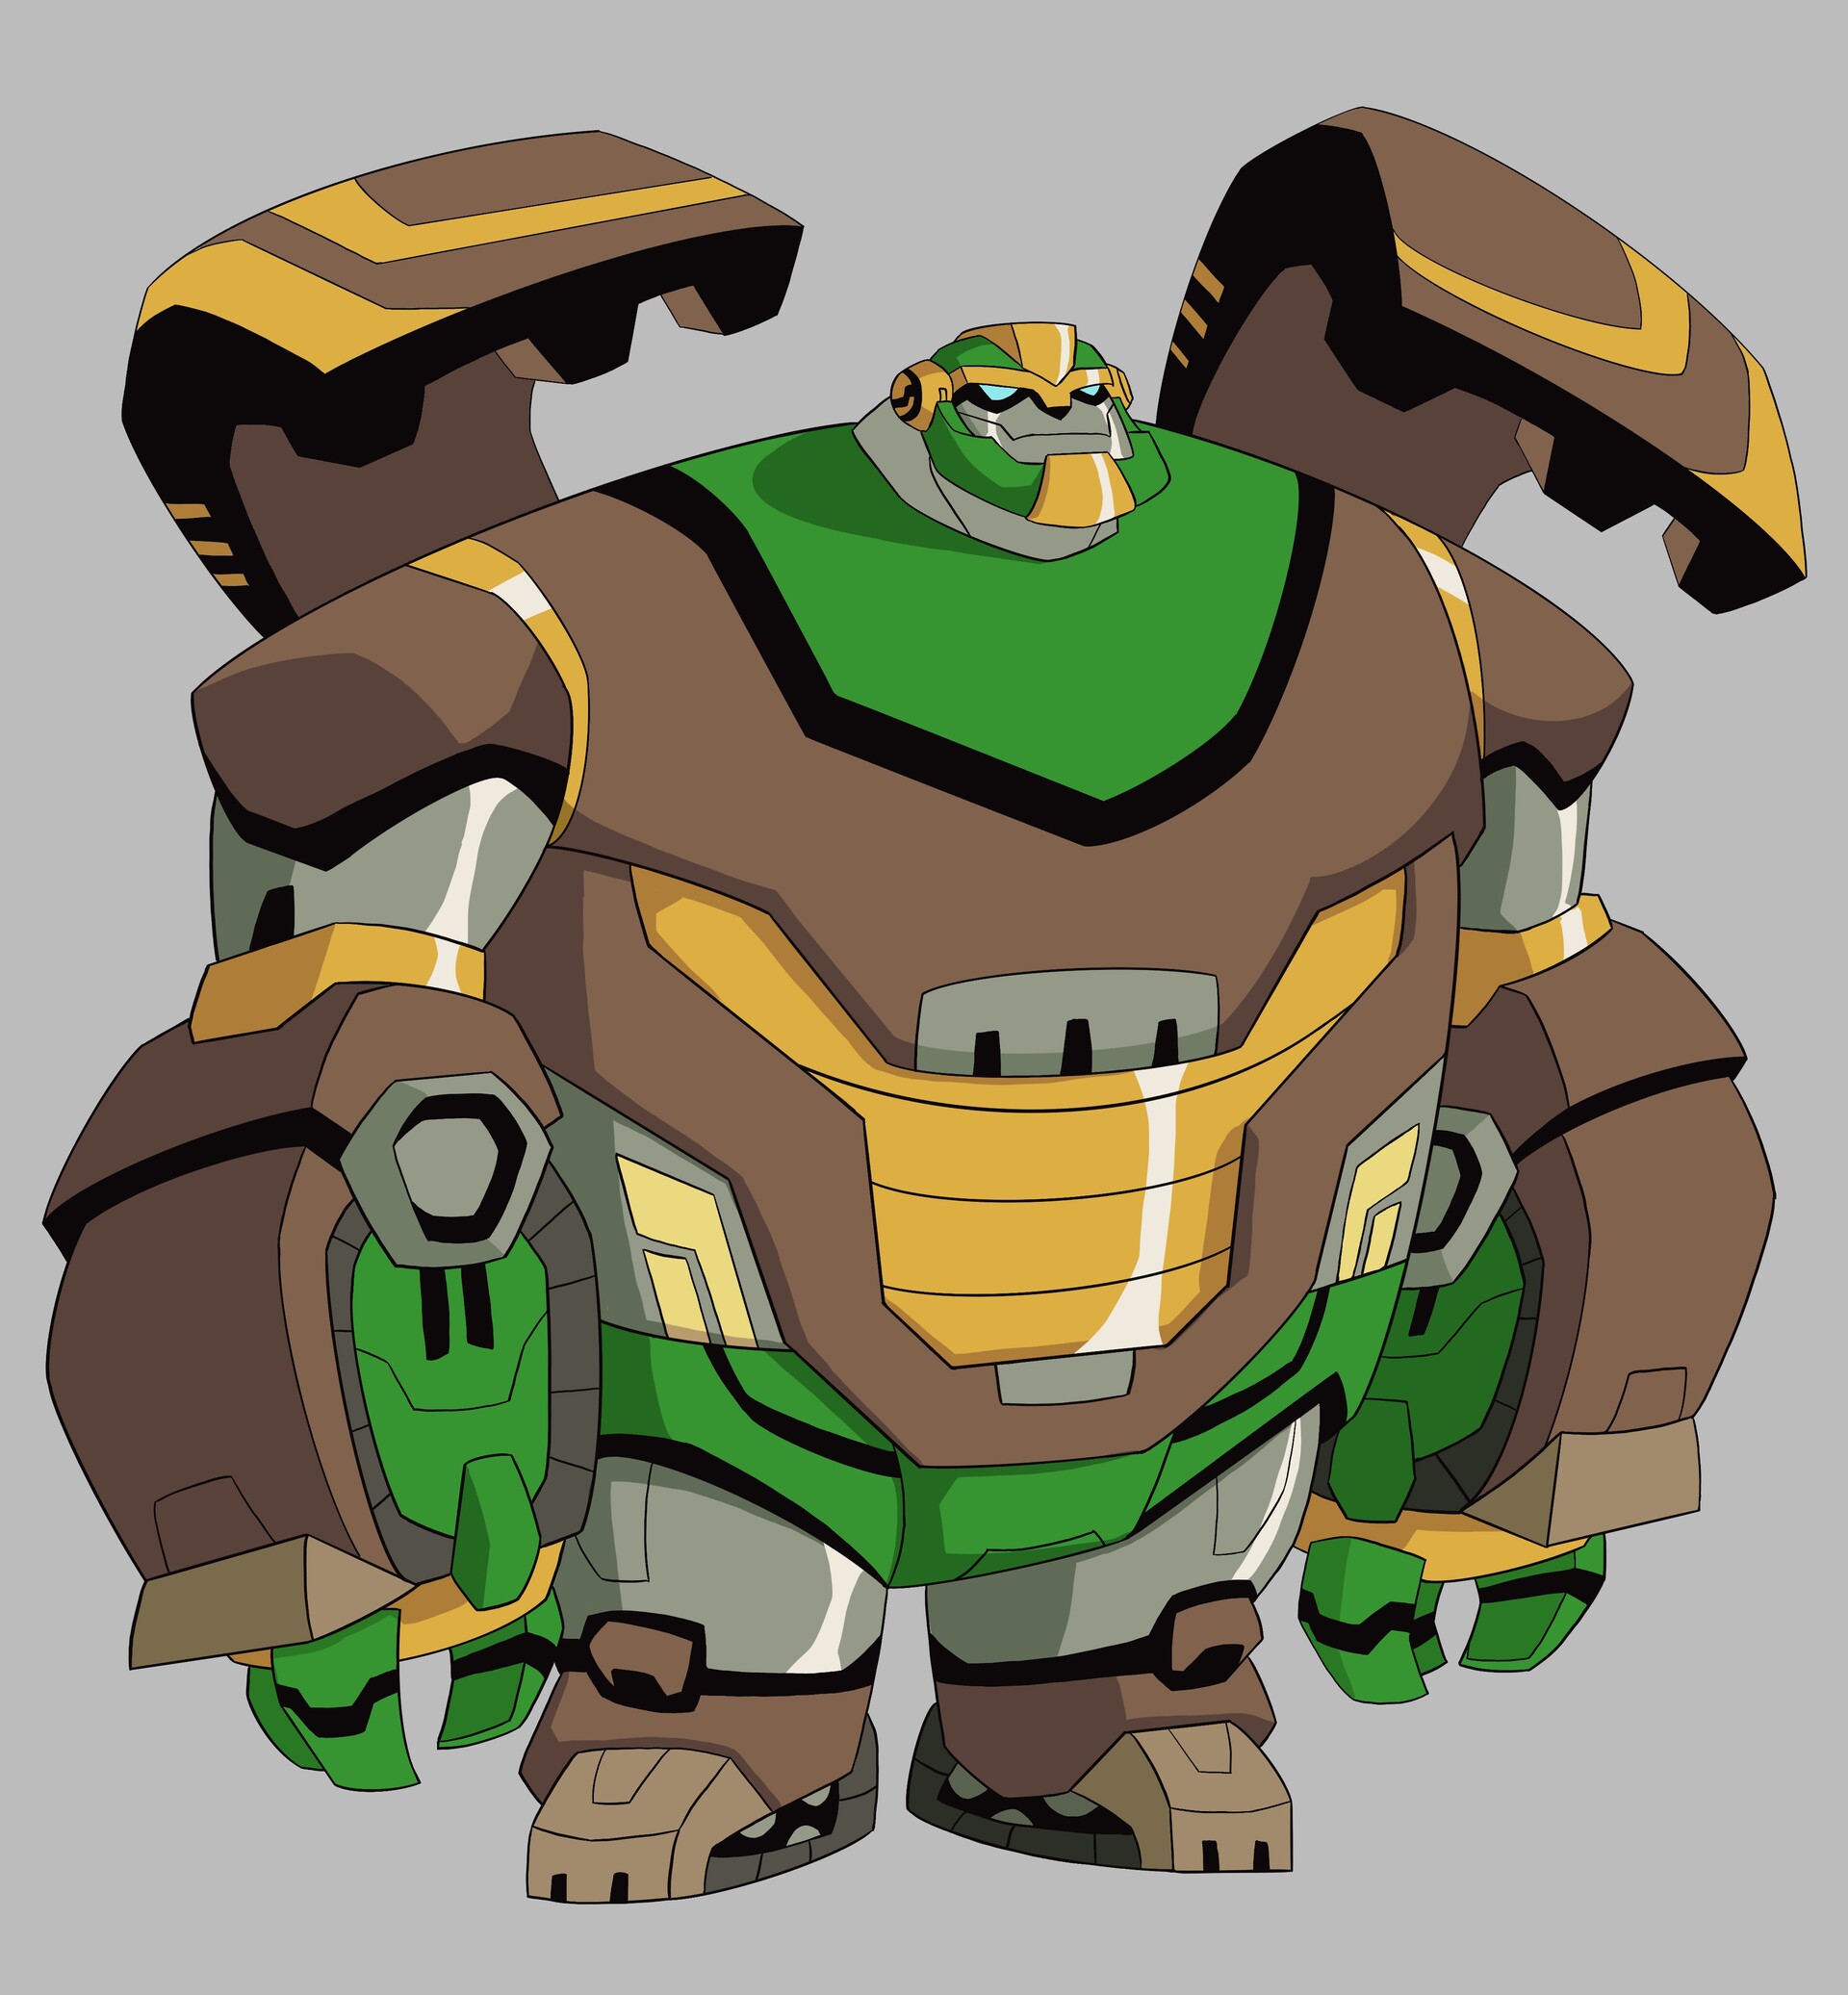 ArtStation - Beast Wars Characters,Transformers Animated Style